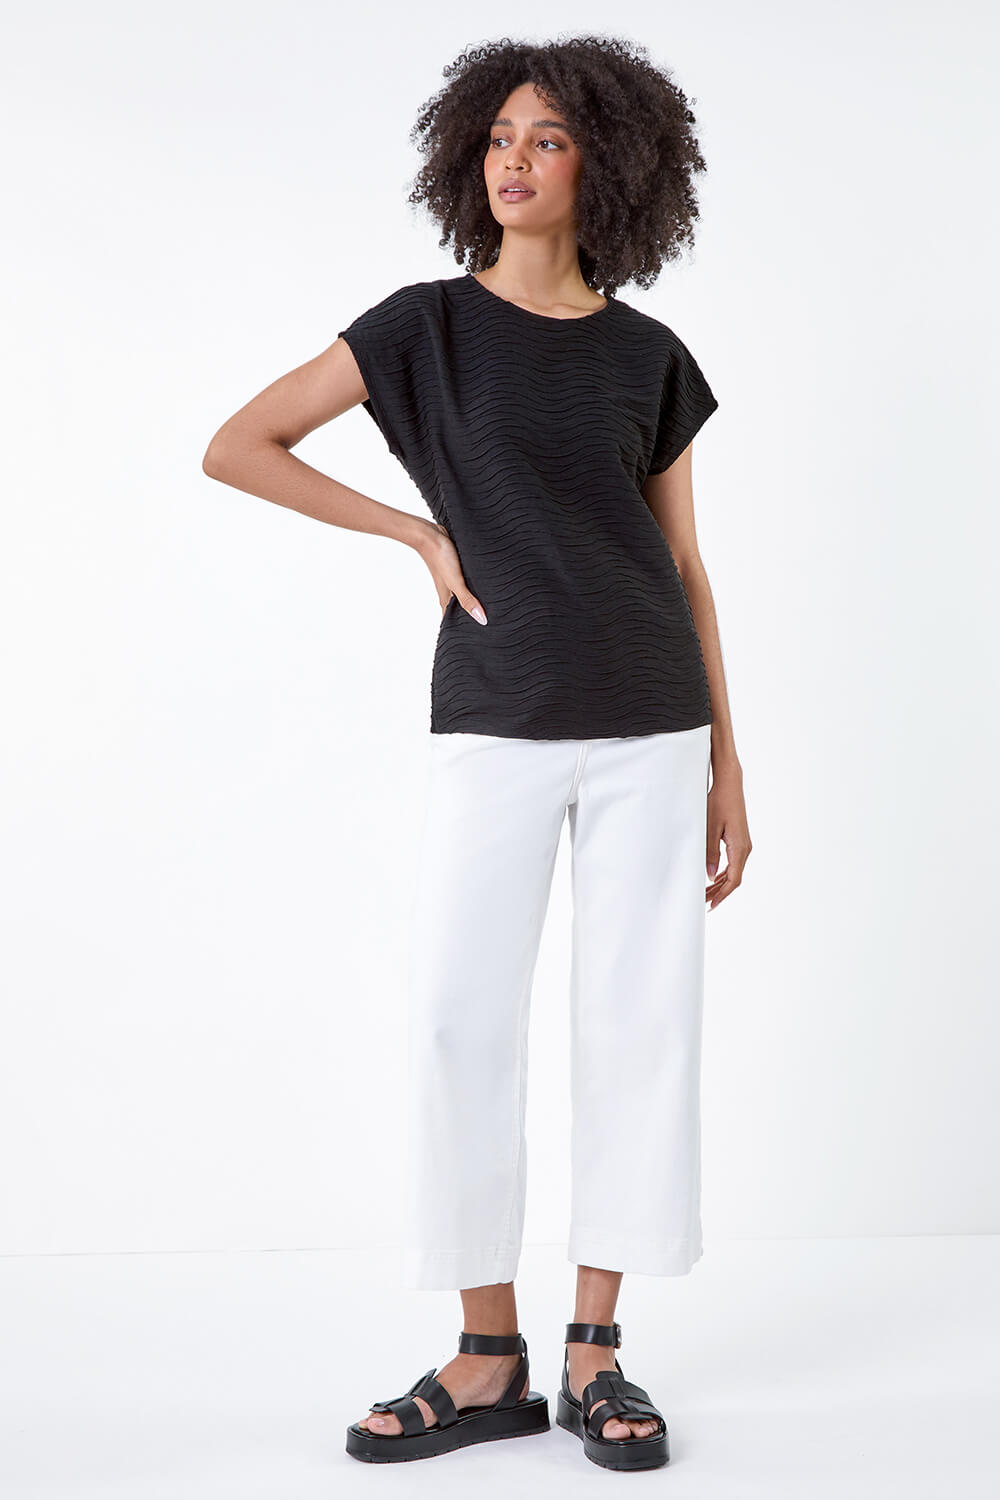 Black Plain Wave Textured Stretch Top, Image 2 of 5